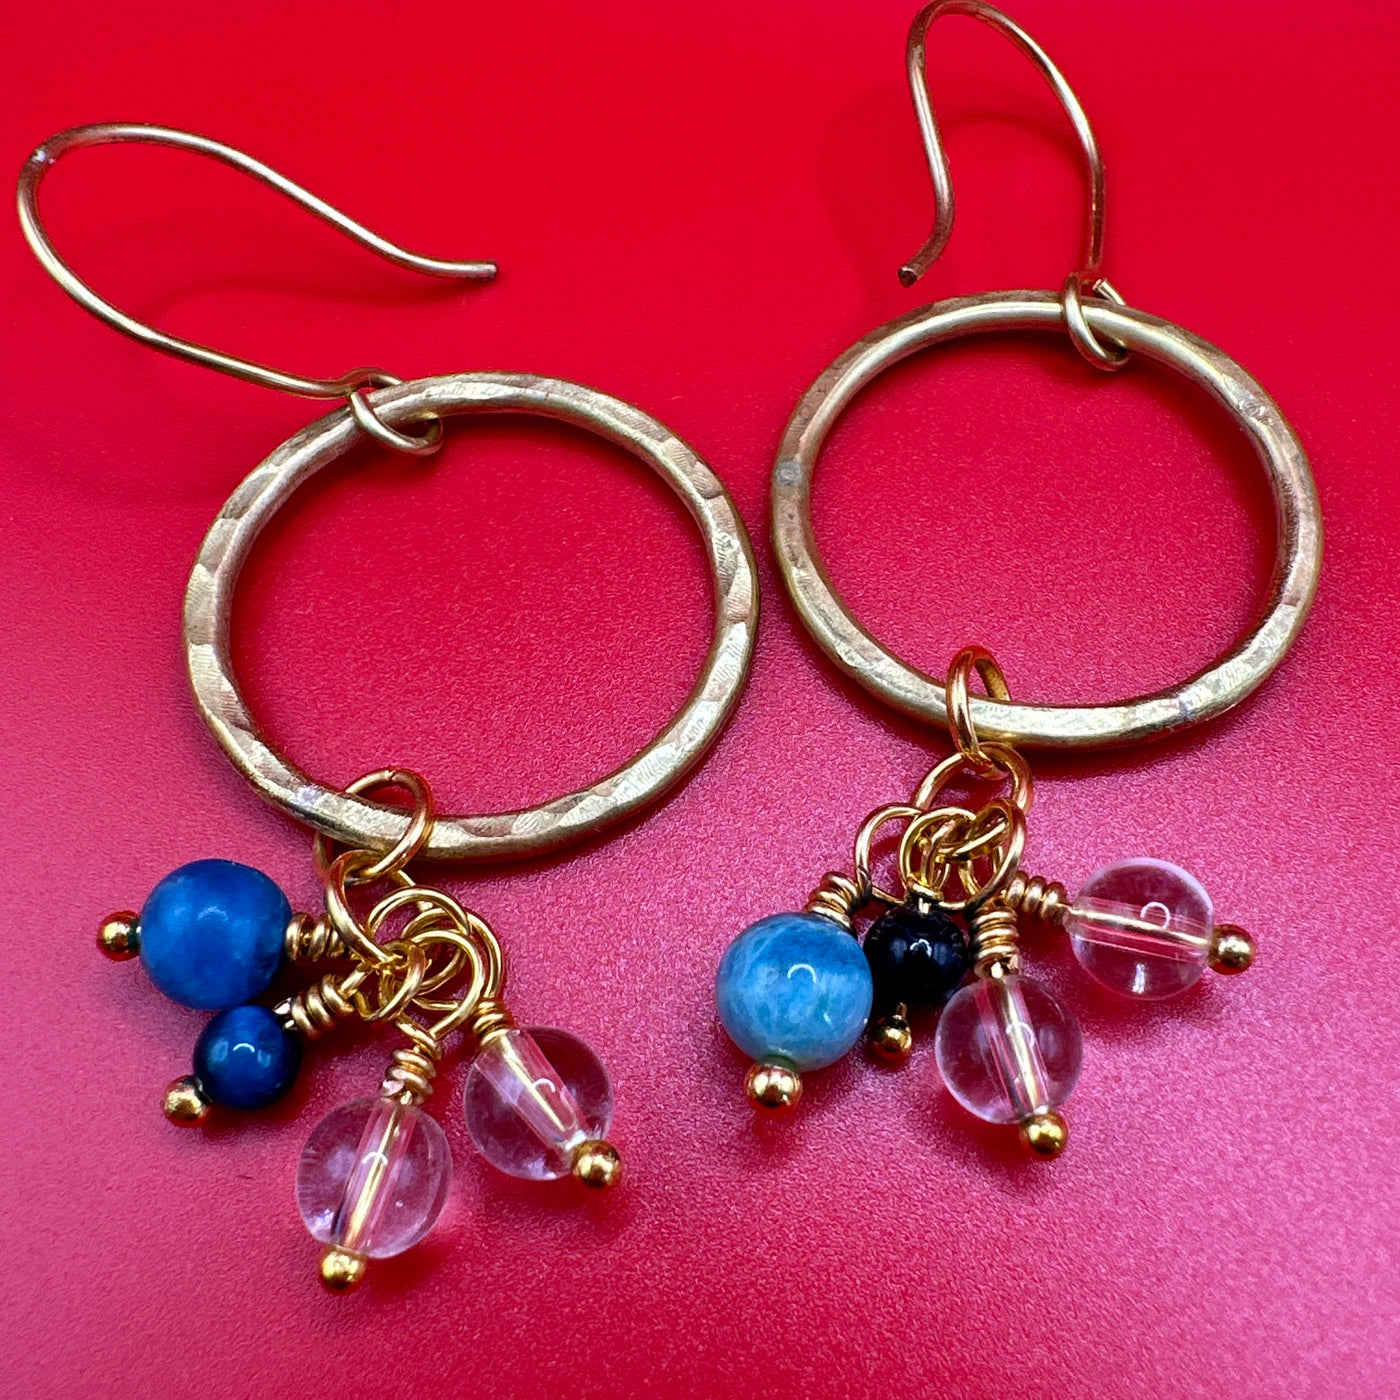 Brass round earrings and multiple stones